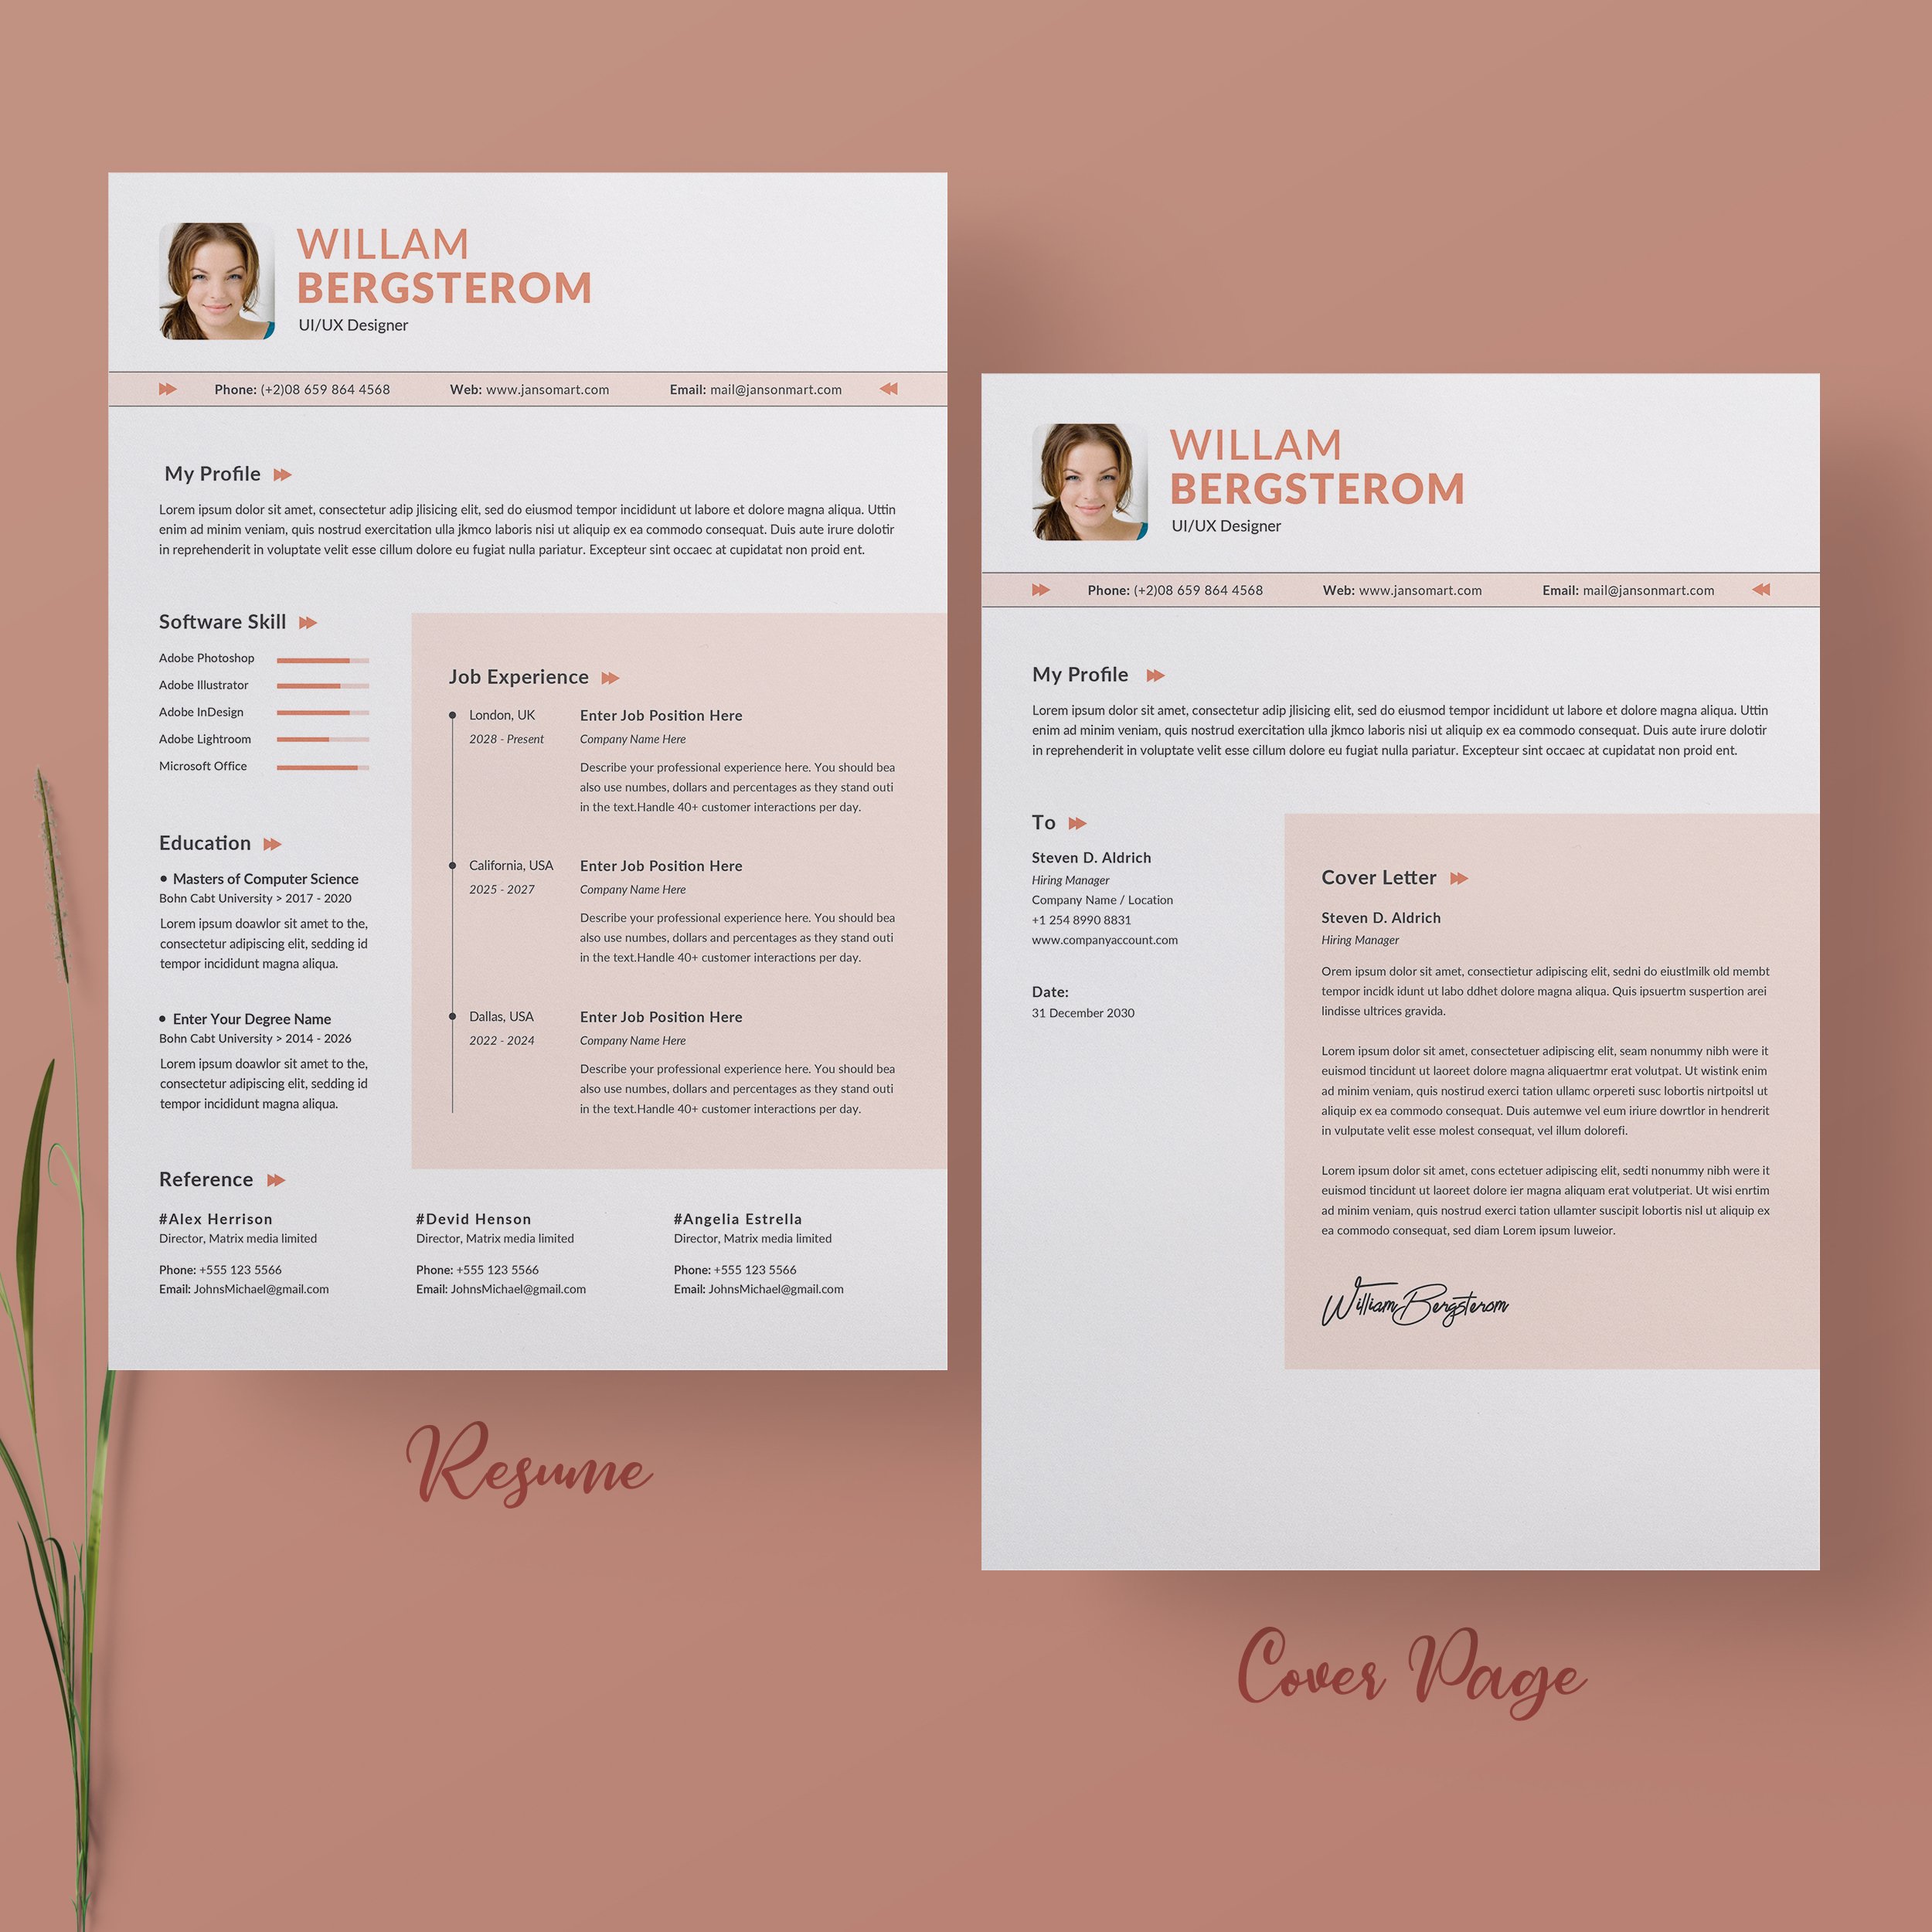 Resume/CV Word preview image.